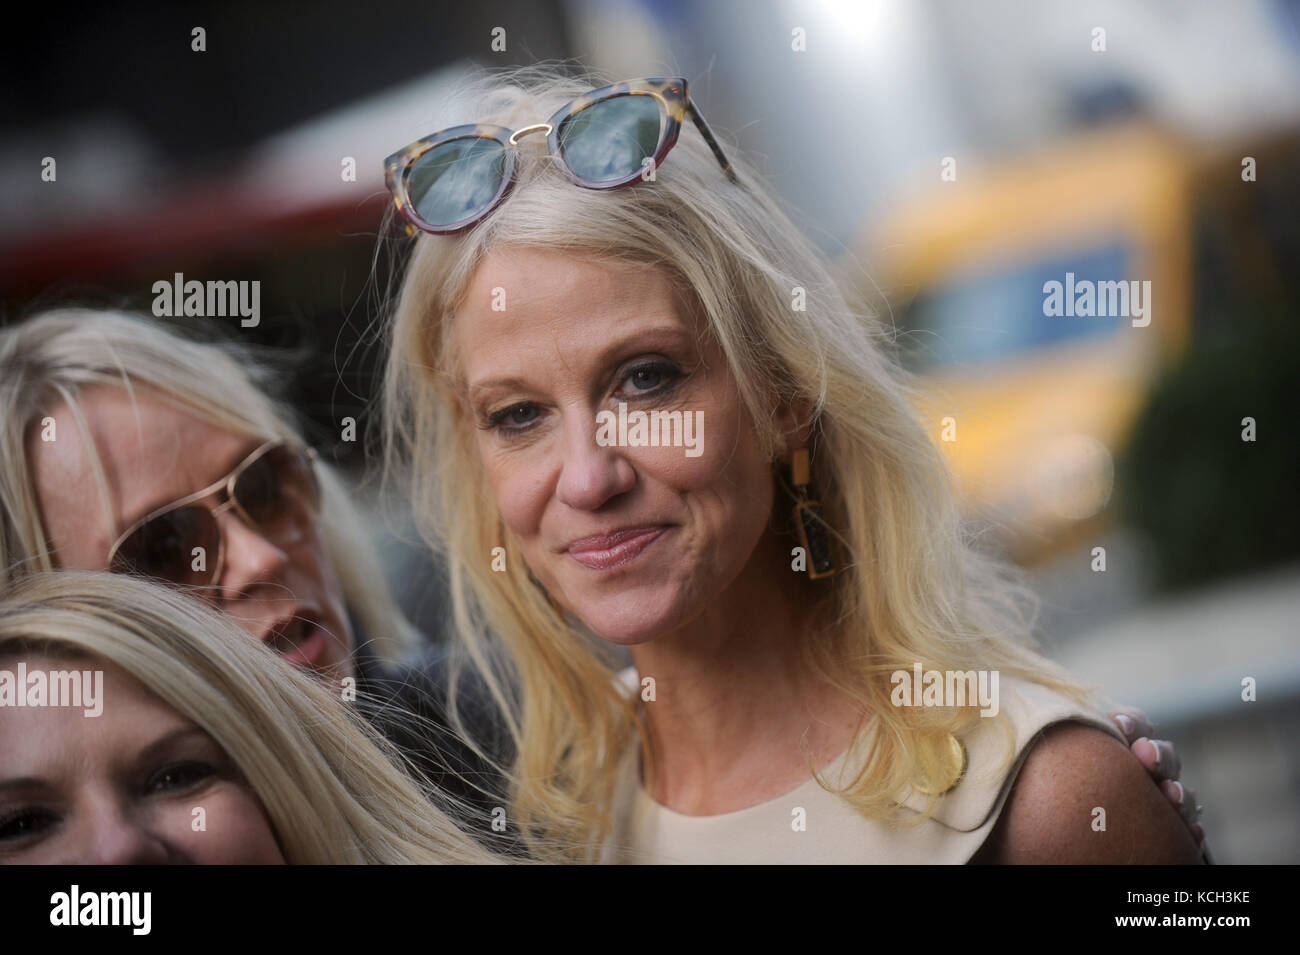 NEW YORK, NY - DECEMBER 2: Kellyanne Conway at Trump Tower. President-elect Donald Trump and his transition team are in the process of filling cabinet and other high level positions for the new administration on December 2, 2016 in New York City.  People:  Kellyanne Conway  Transmission Ref:  MNC1  Hoo-Me.com / MediaPunch Stock Photo